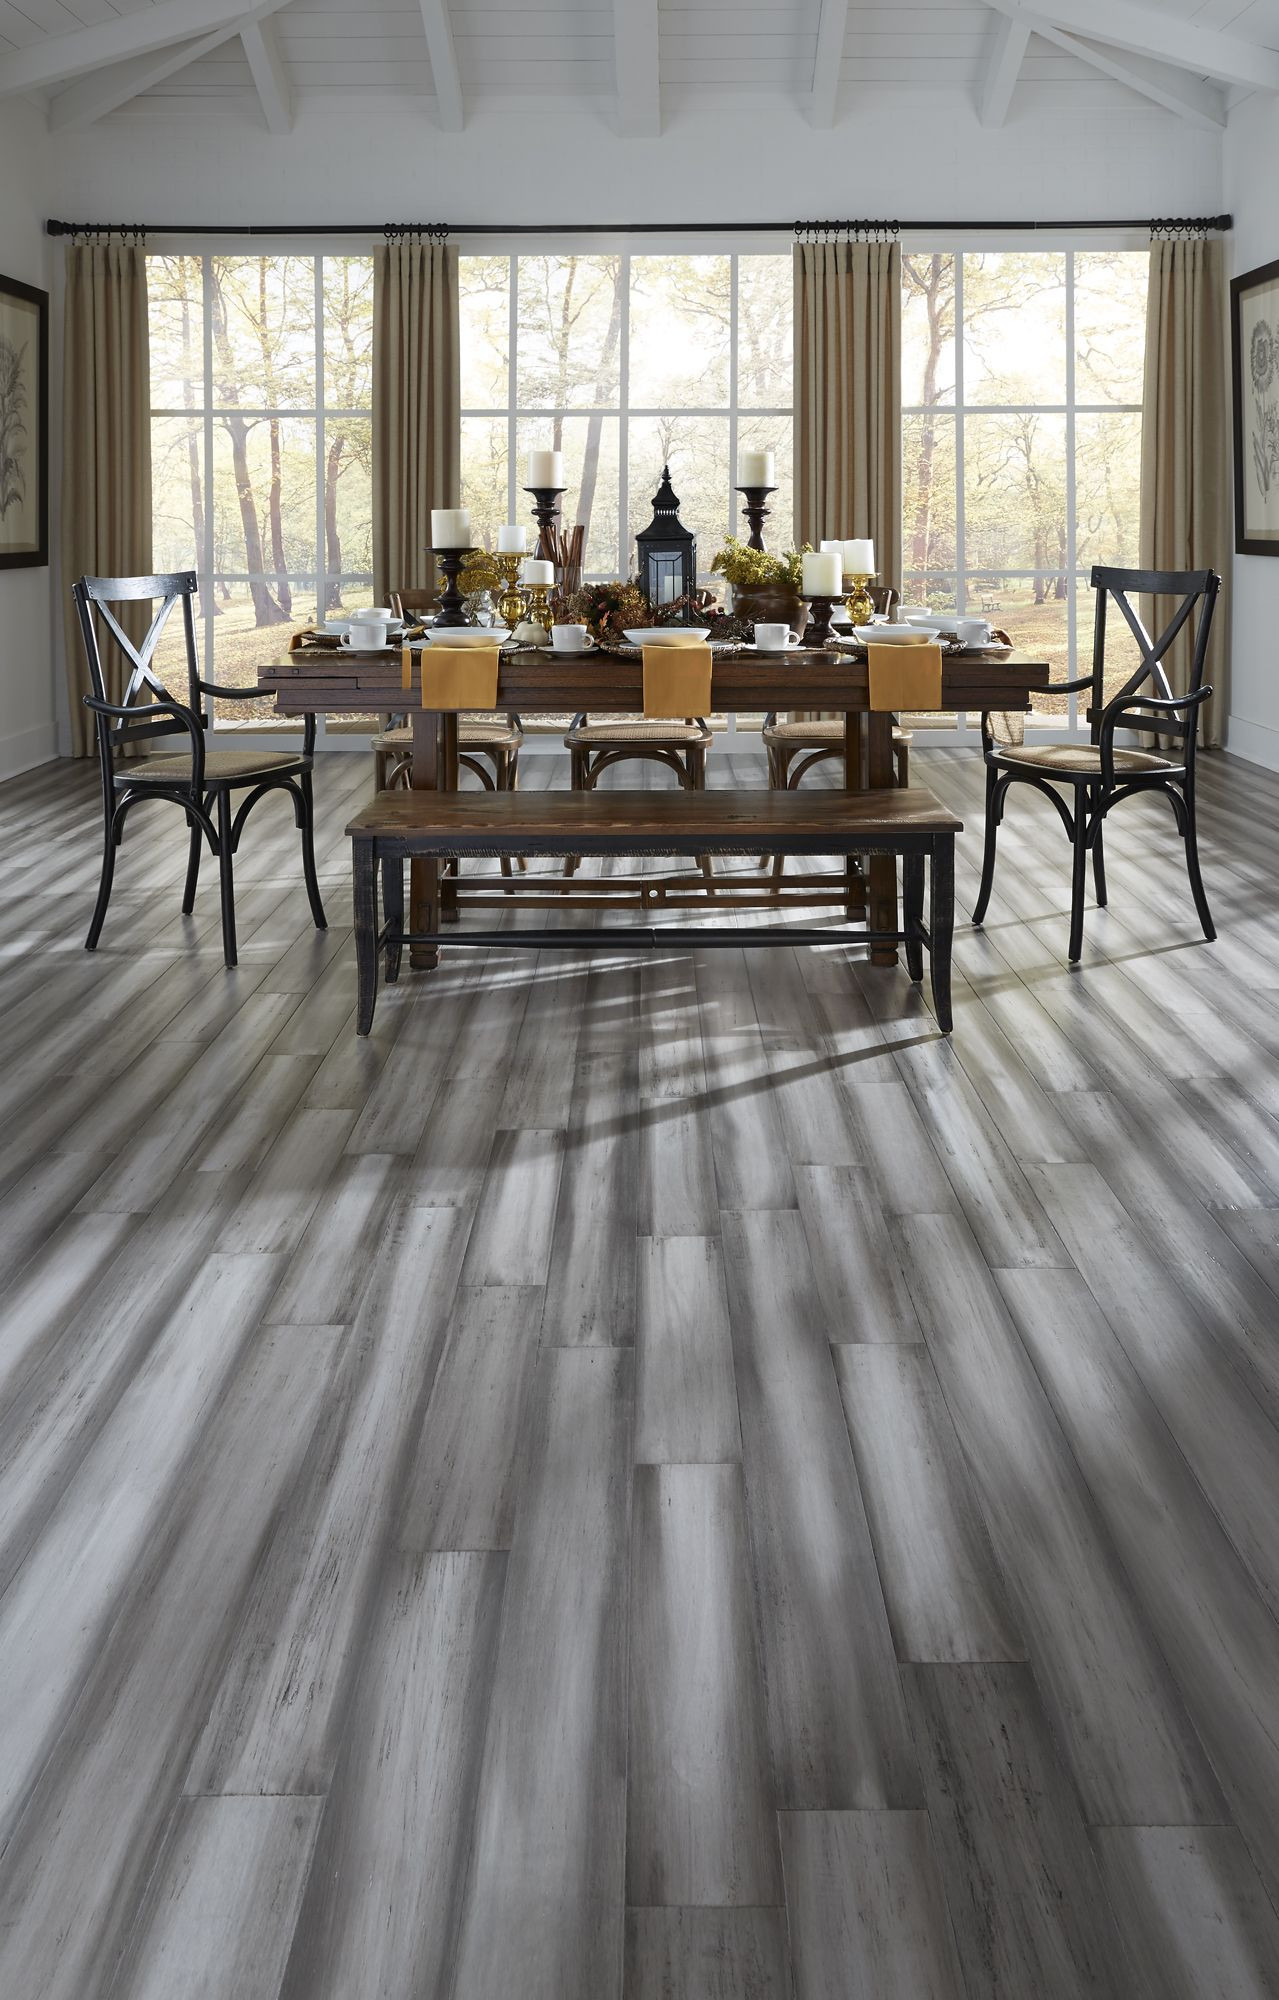 18 Amazing Light Gray Hardwood Floors 2022 free download light gray hardwood floors of modern design and rustic texture pair perfectly with the stately pertaining to modern design and rustic texture pair perfectly with the stately blend of light a